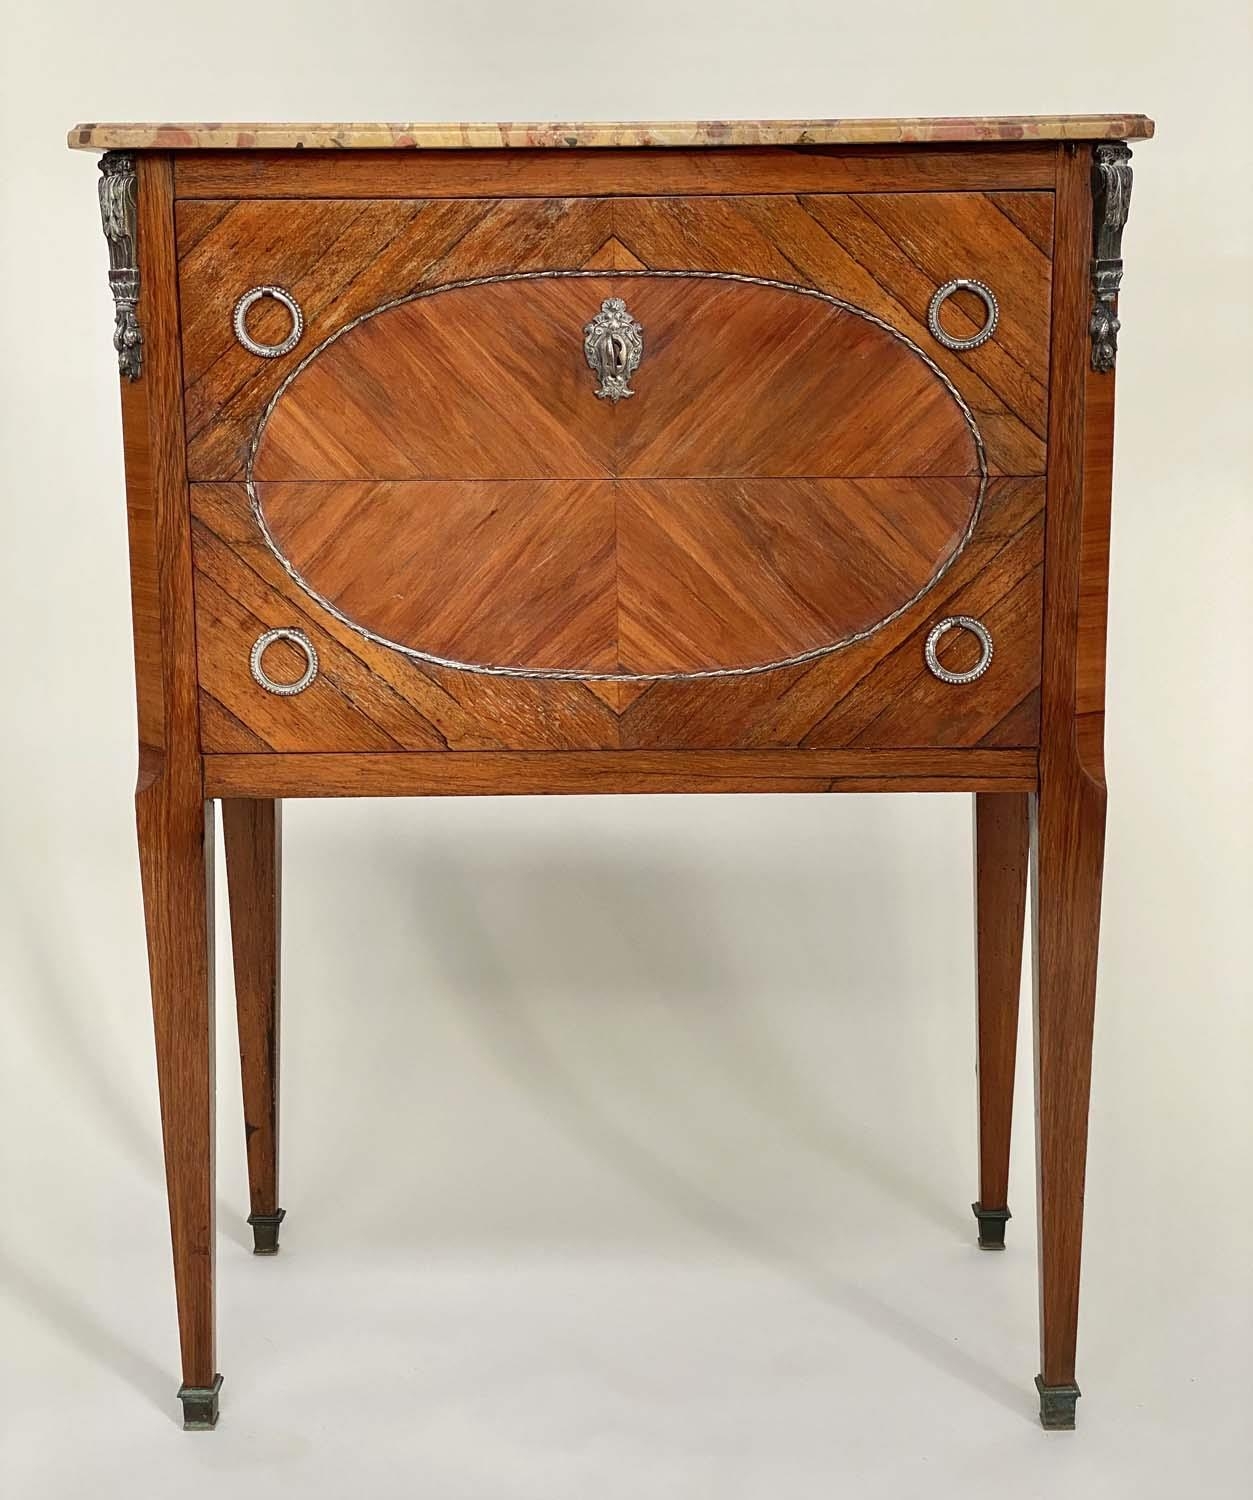 COMMODE, French Louis XVI style kingwood and silver gilt metal mounted with two drawers, 61cm x 34cm - Image 3 of 6